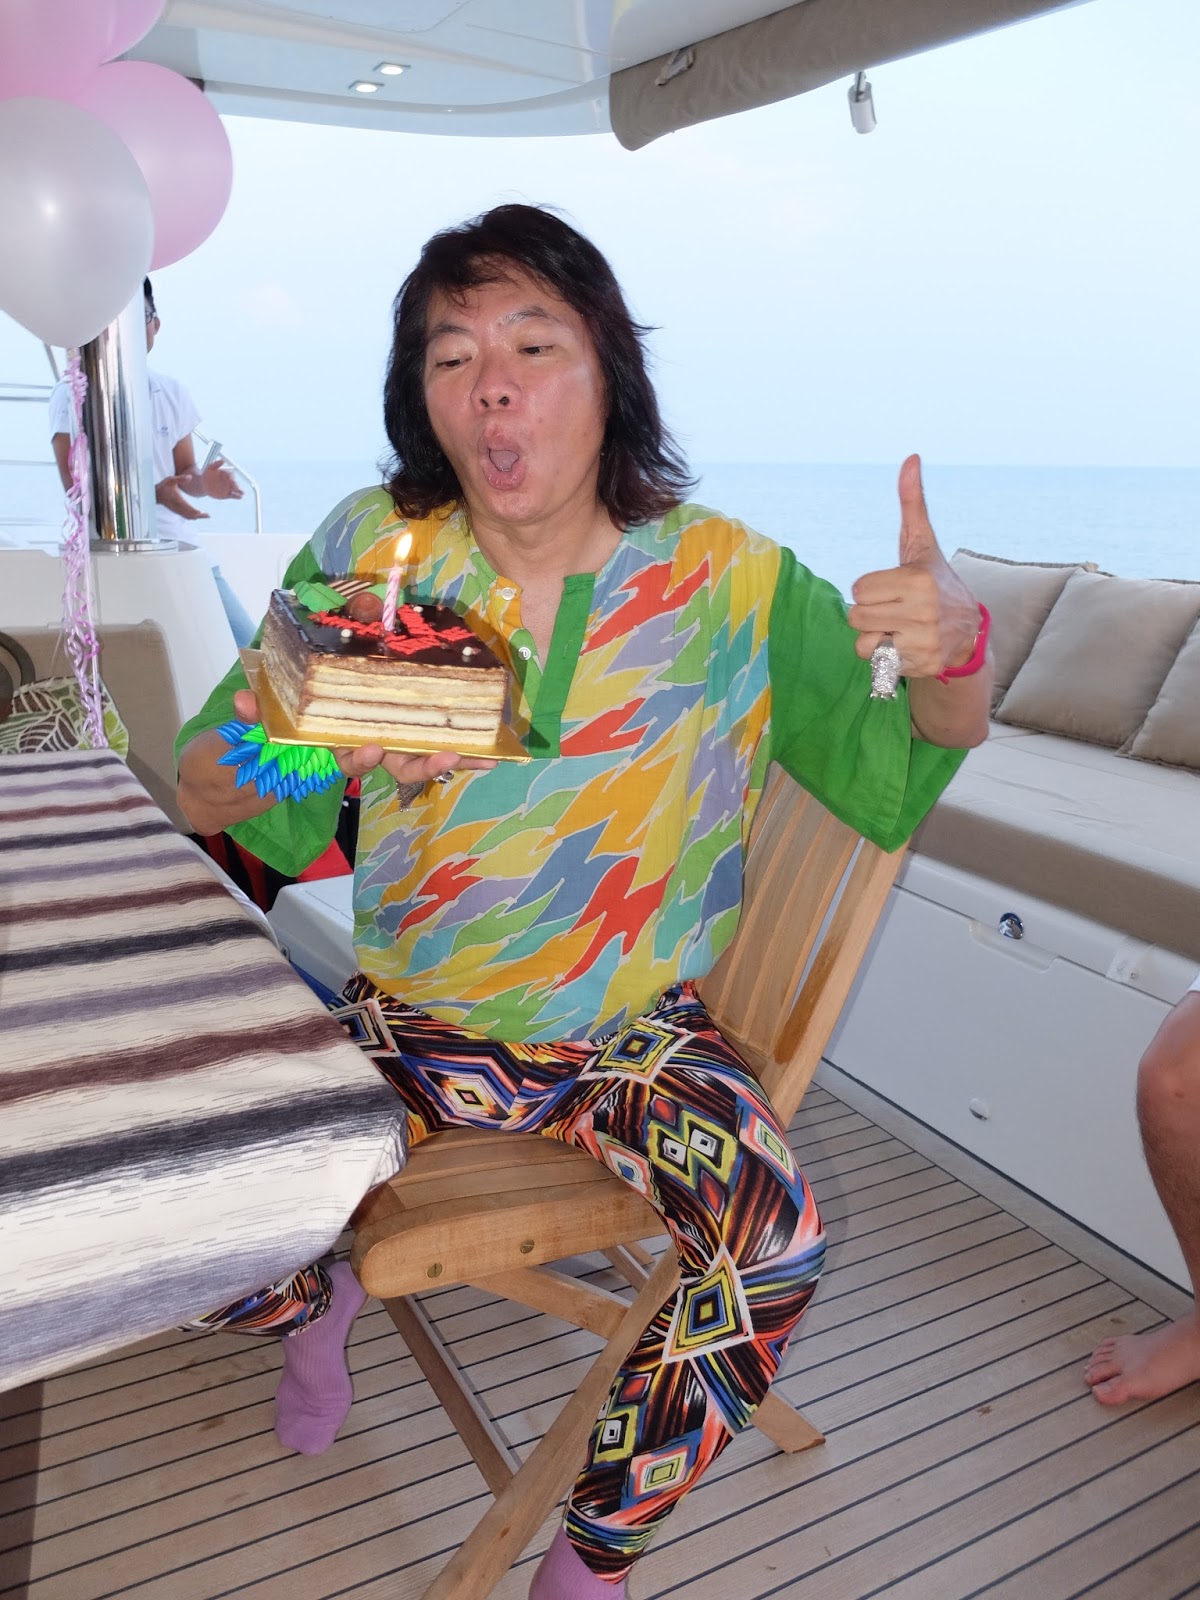 Kee Hua Chee Live Part 5 Happy Birthday To Dato Kee Hua Chee Yet Again Onboard The